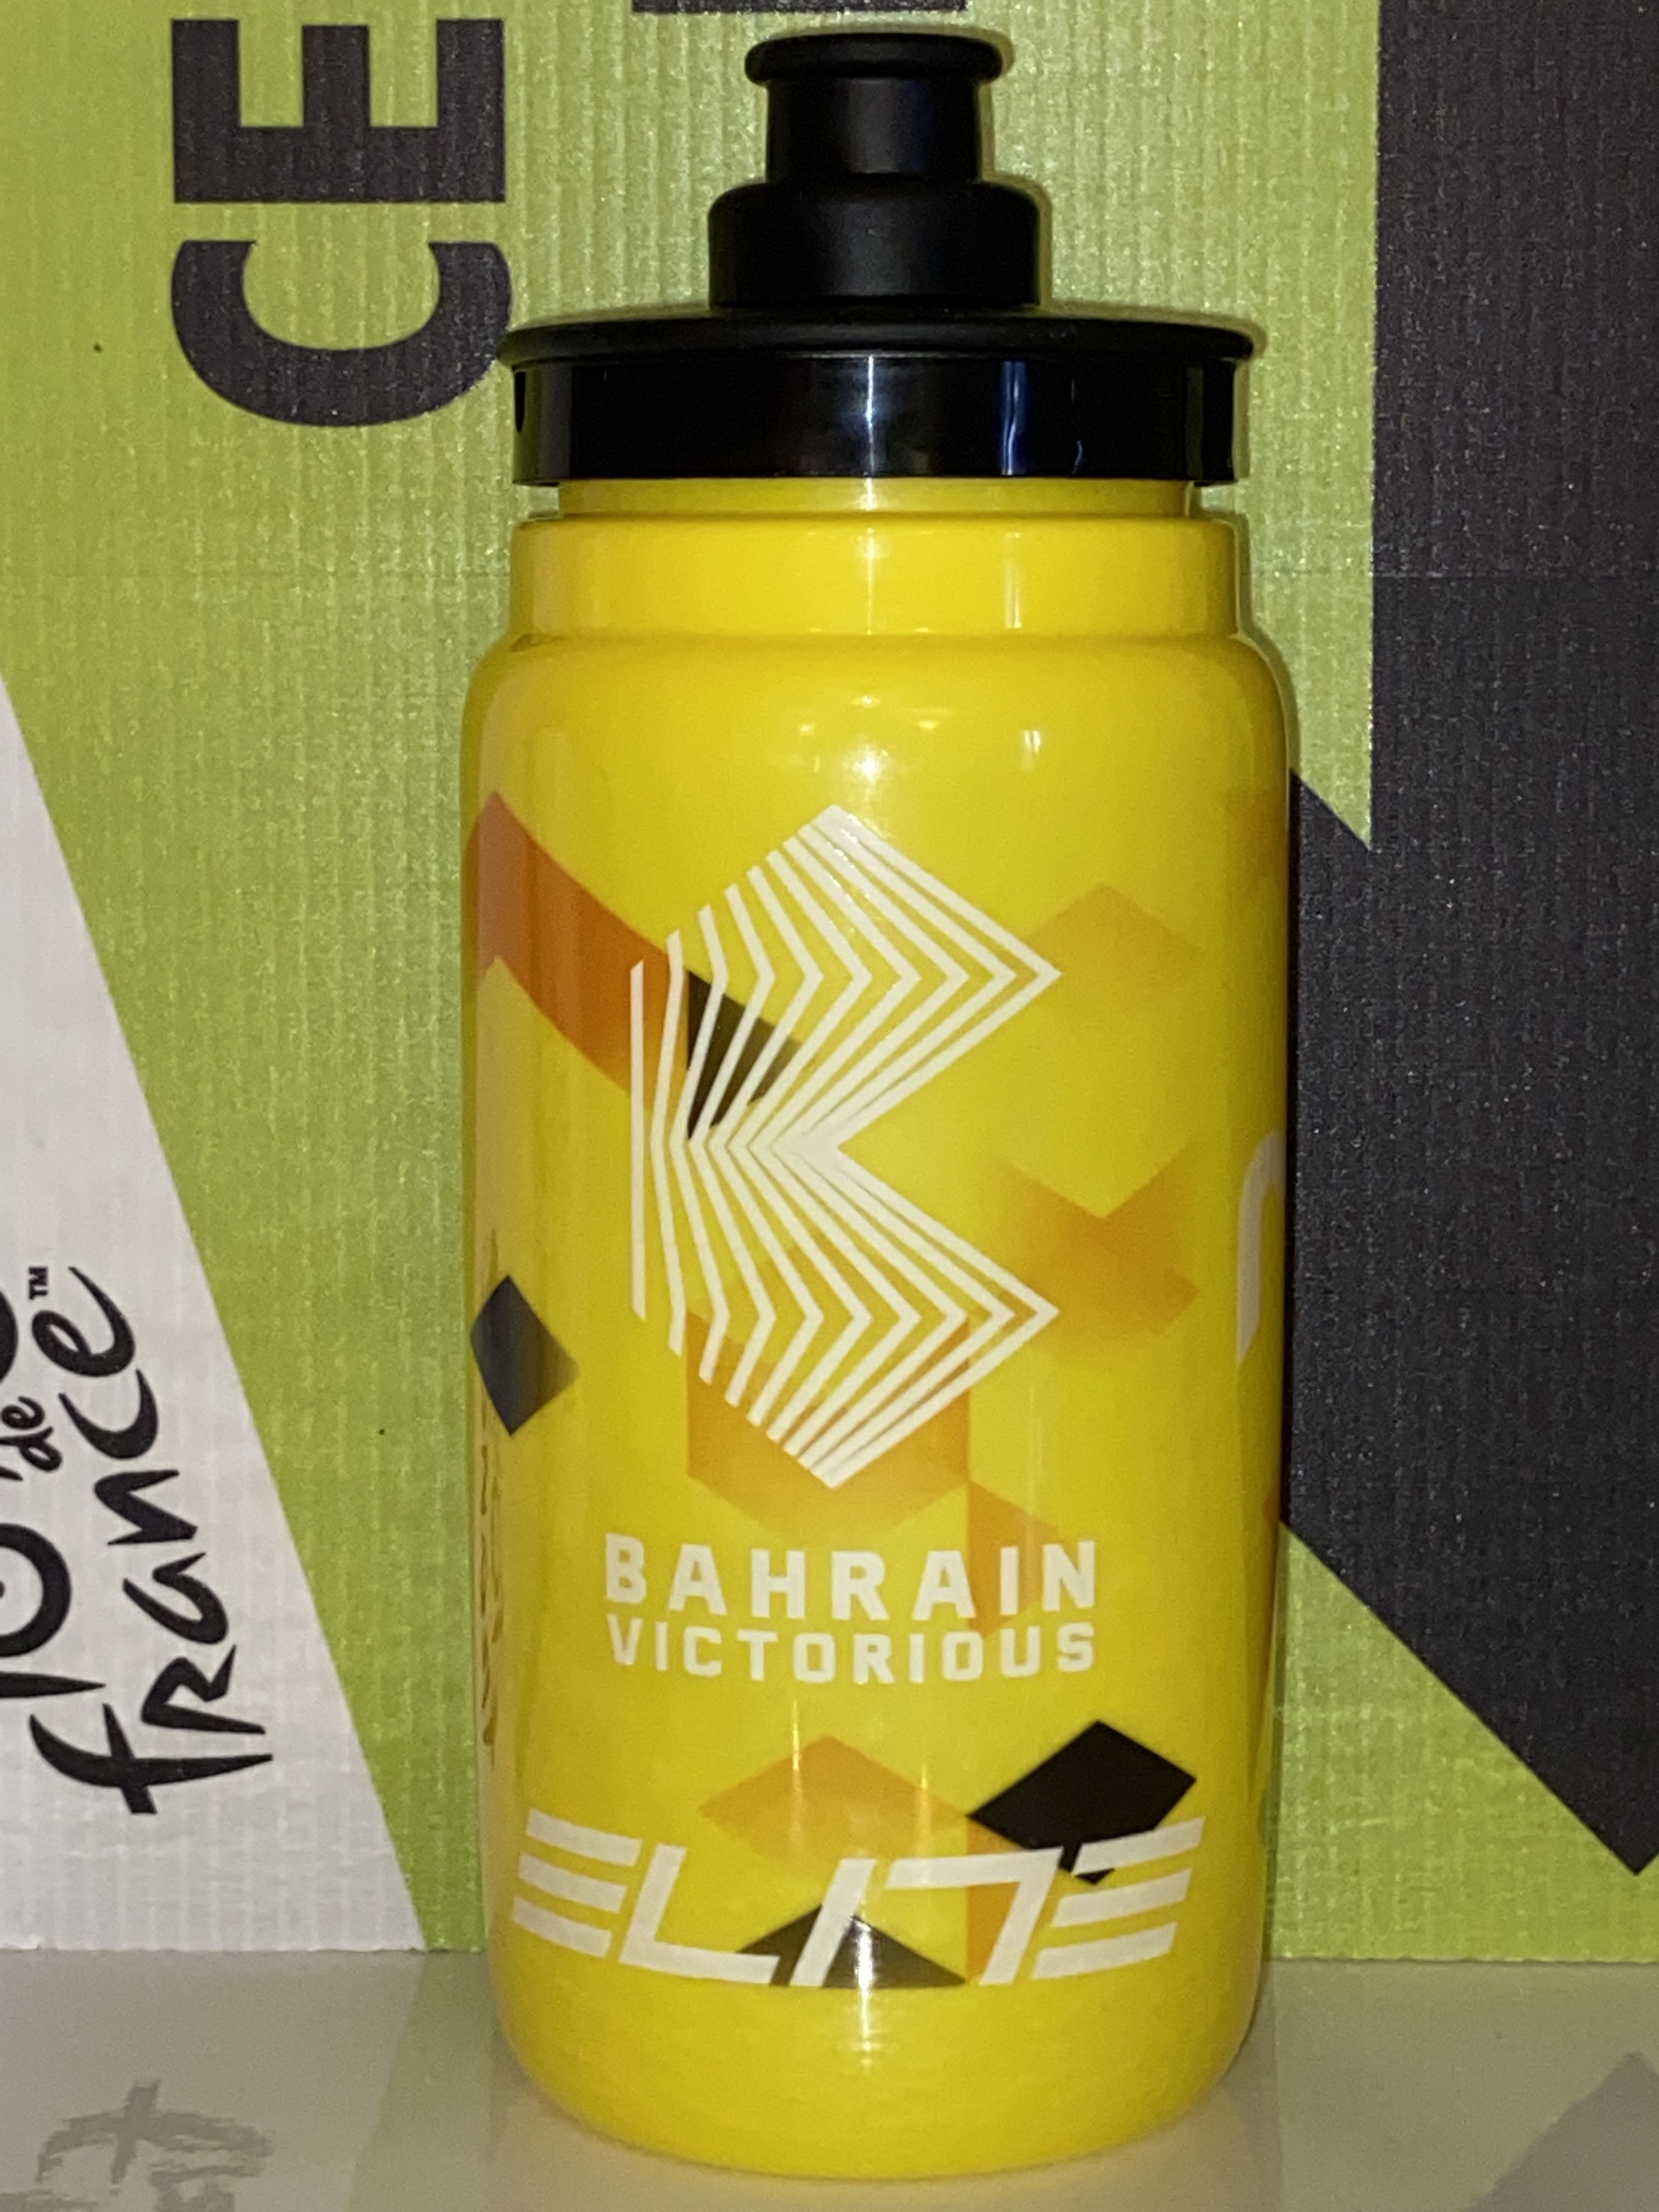 Elite Fly - Bahrain Victorious (edition limitee TDF) - 2022